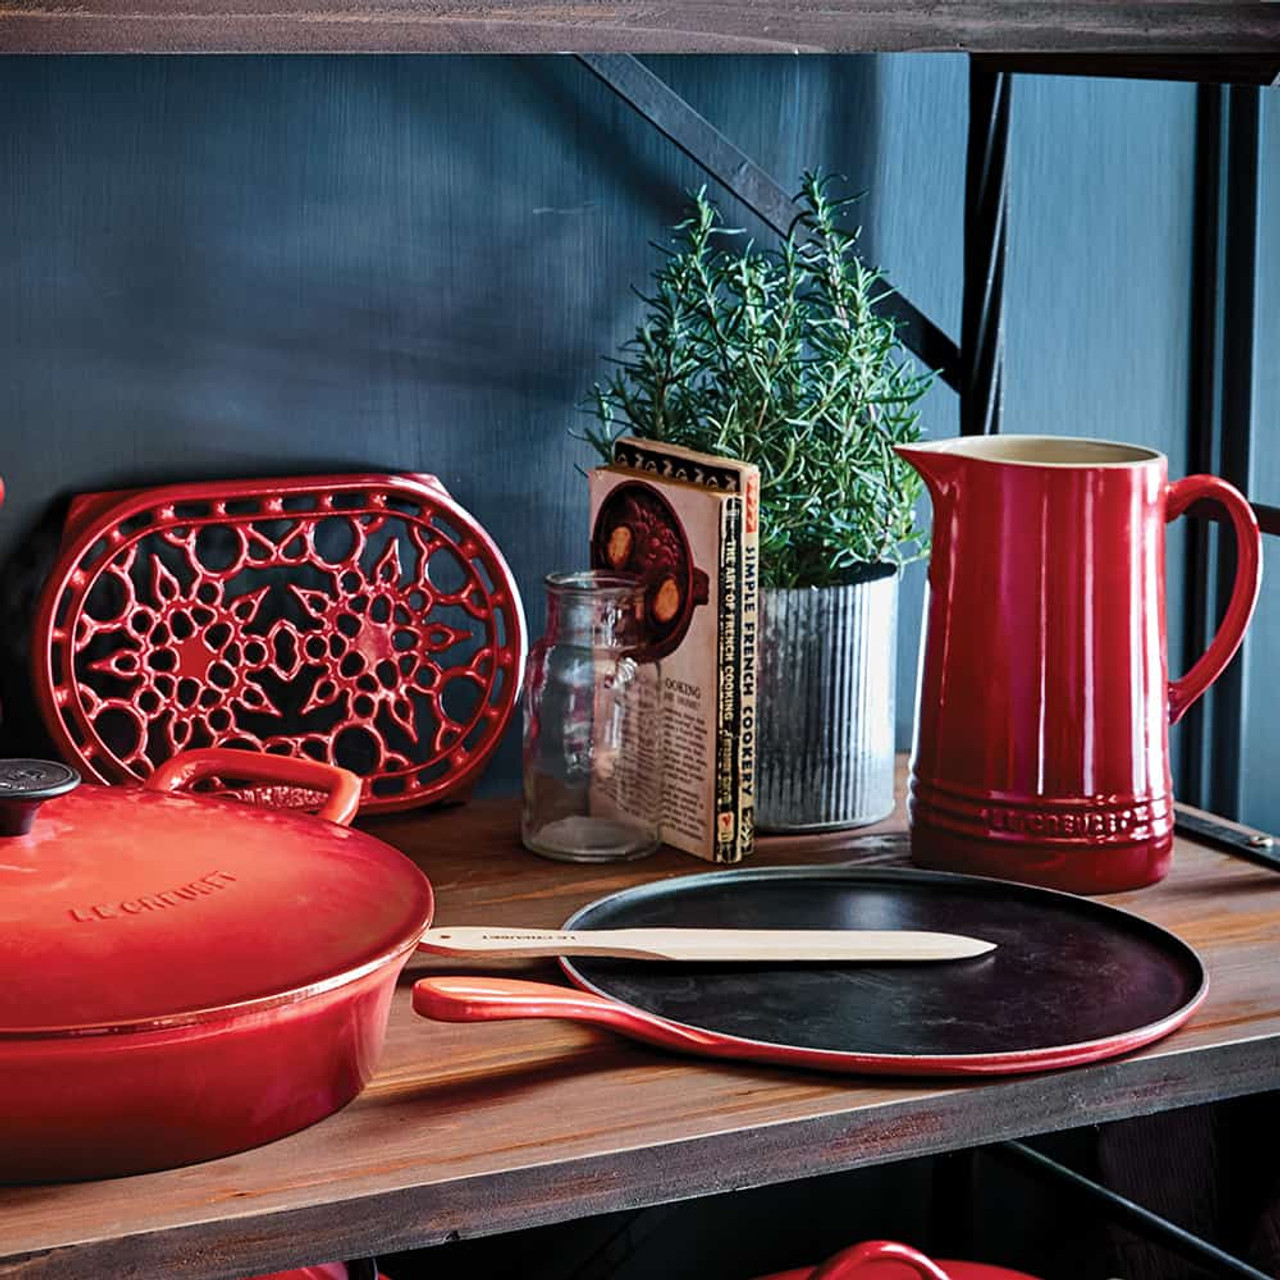 French Cookware Le Creuset - The Reluctant Parisian